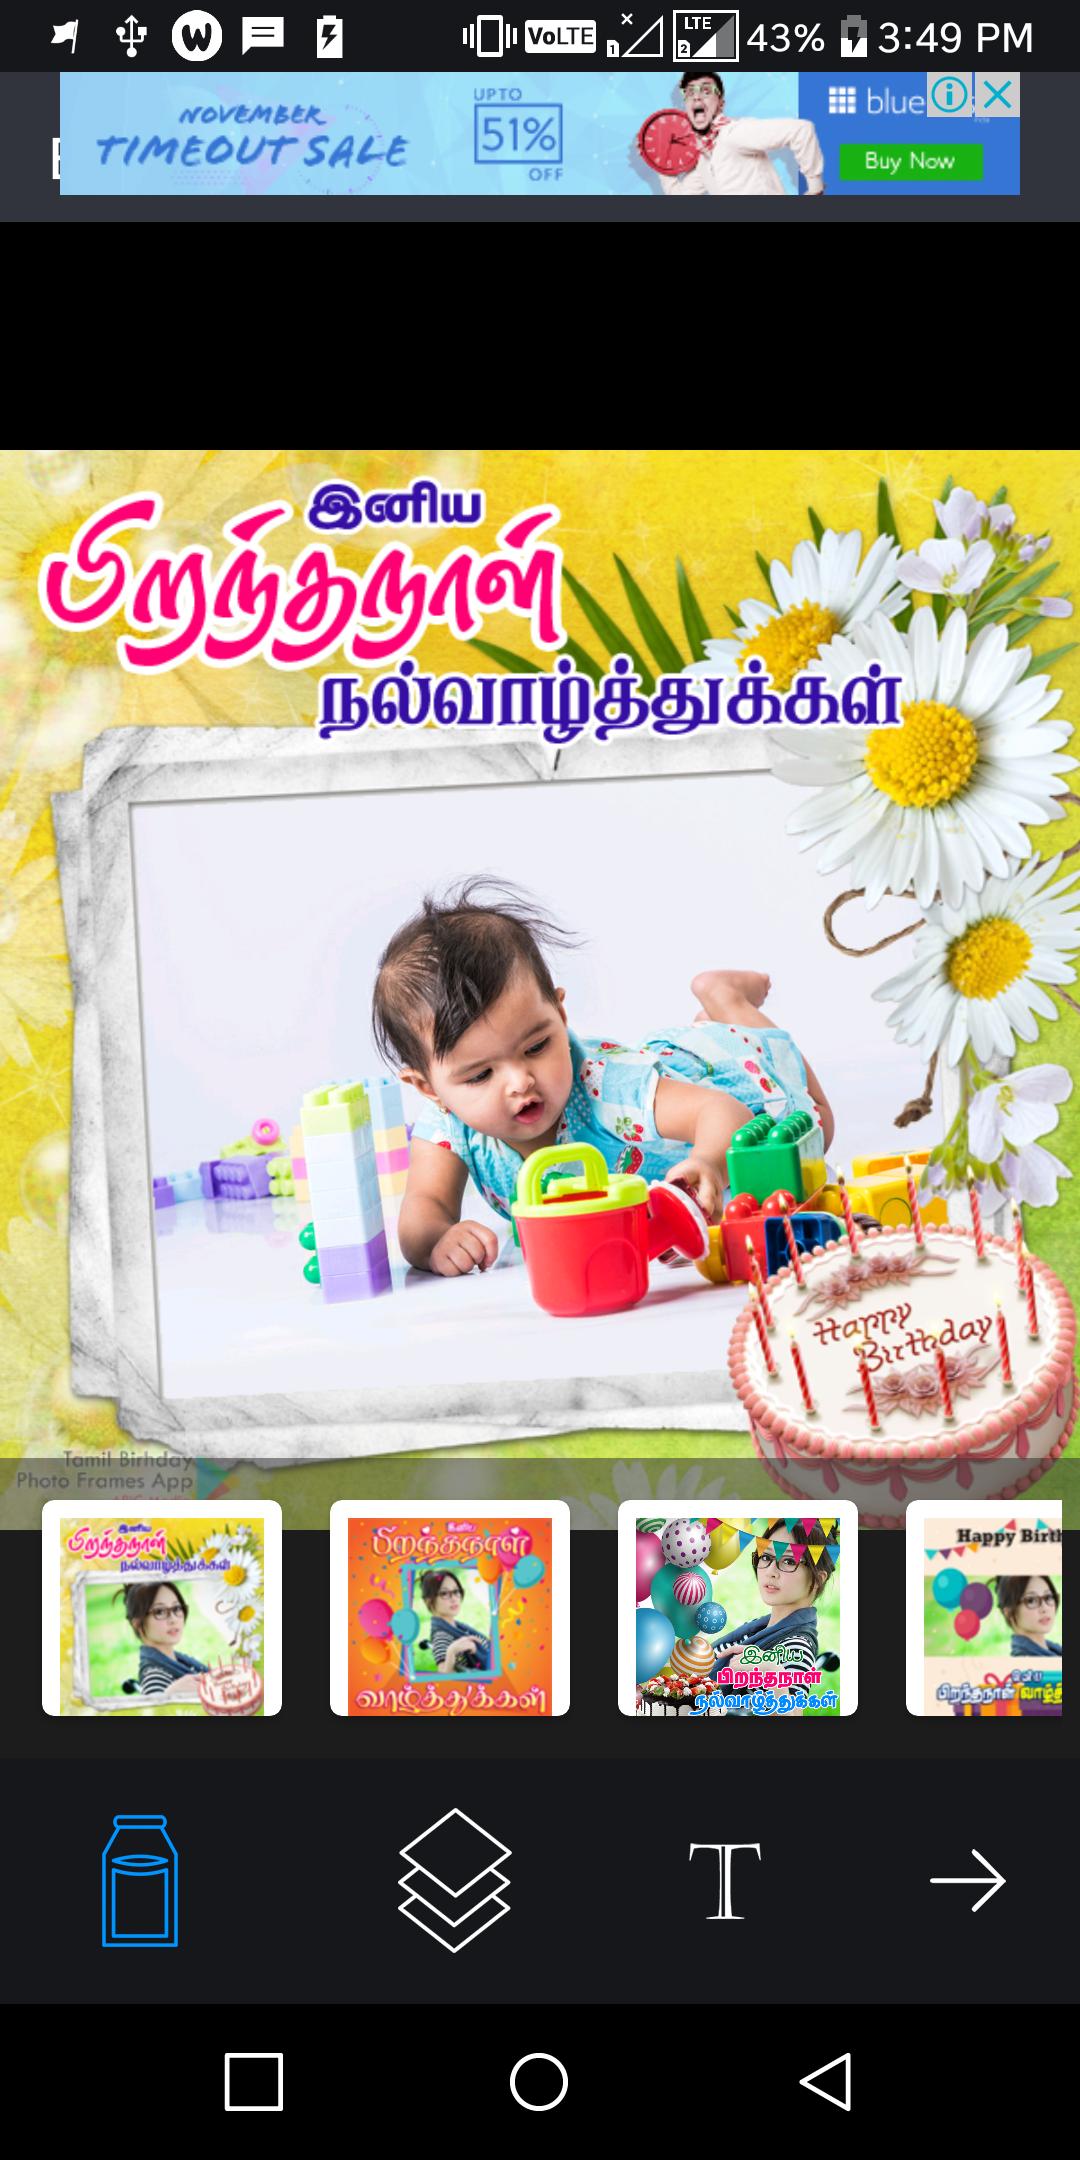 Wallpaper Wish you many more happy birthday in tamil For Android Free